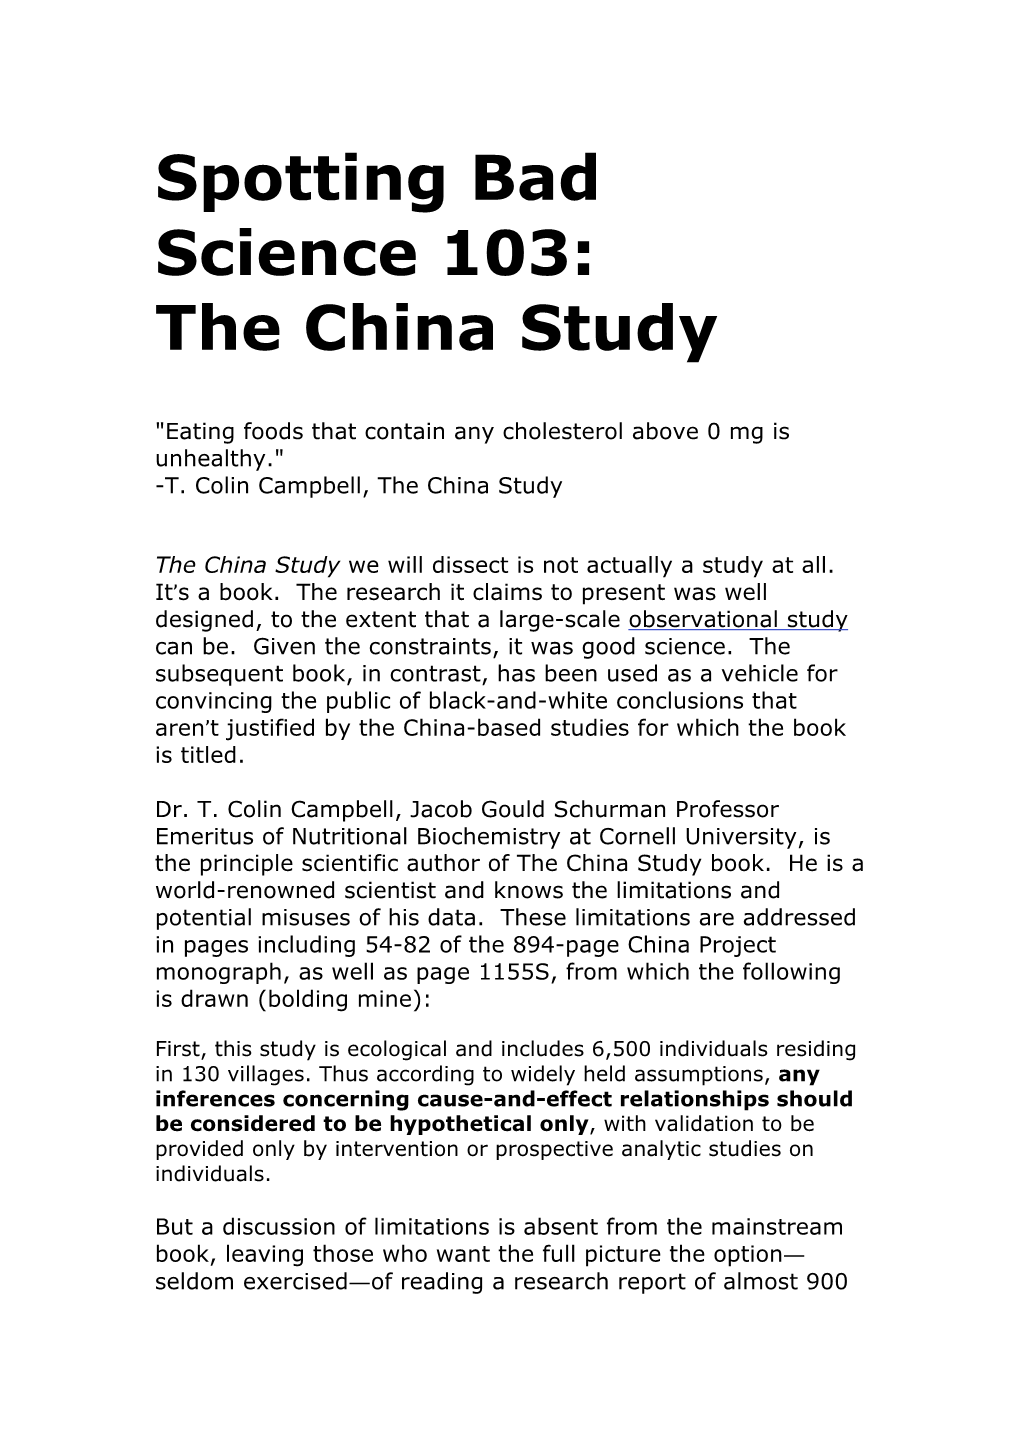 Spotting Bad Science 103: the China Study